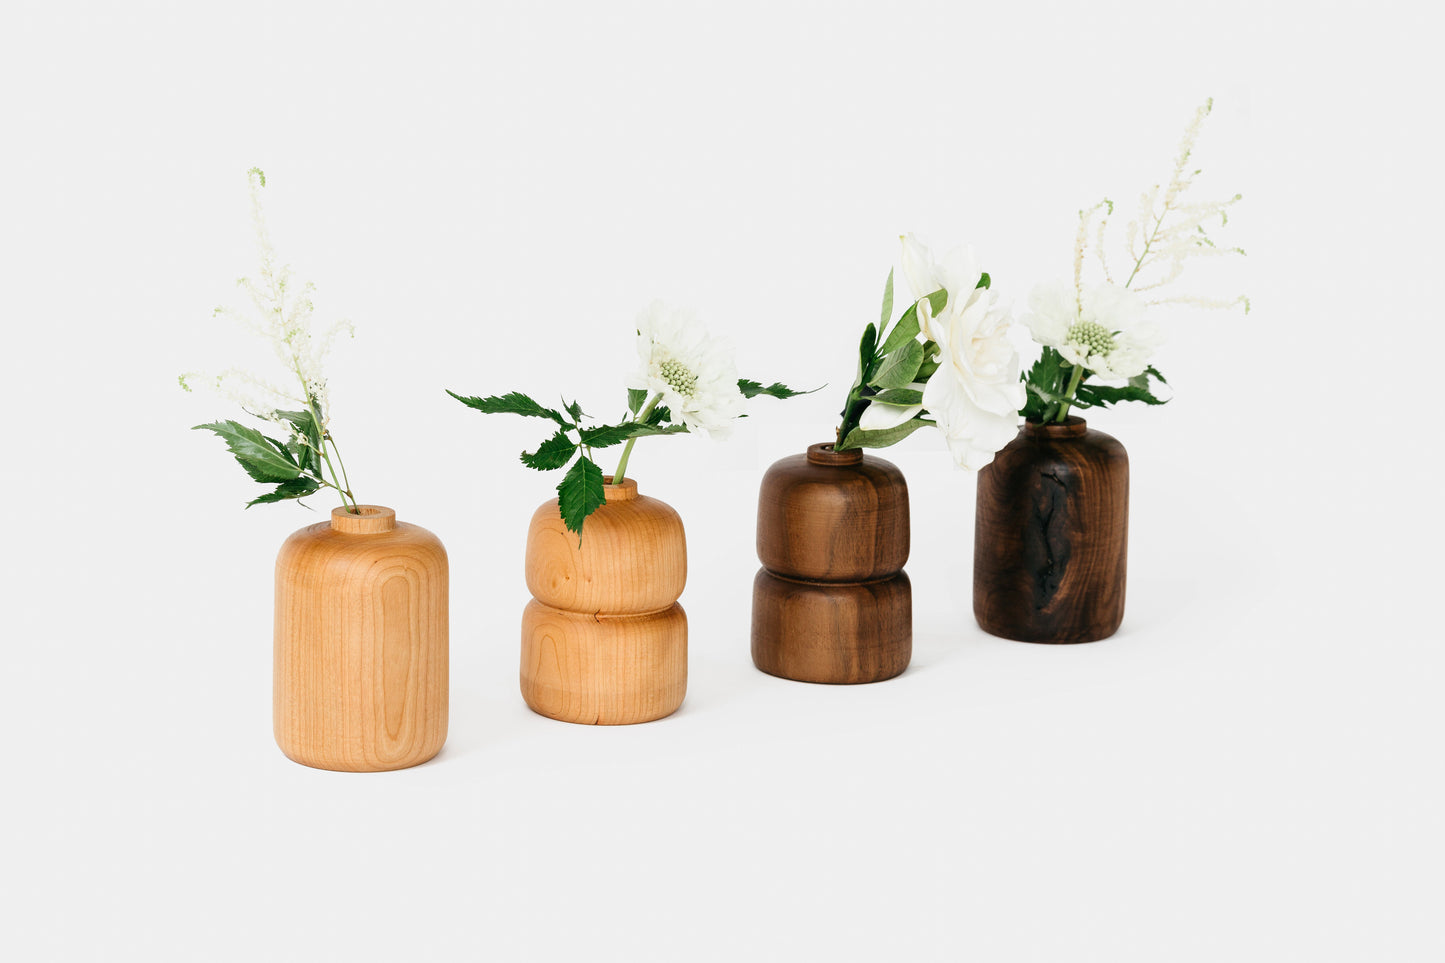 Collection of cherry and walnut bud vases in different styles, all holding flowers. By Melanie Abrantes Designs.